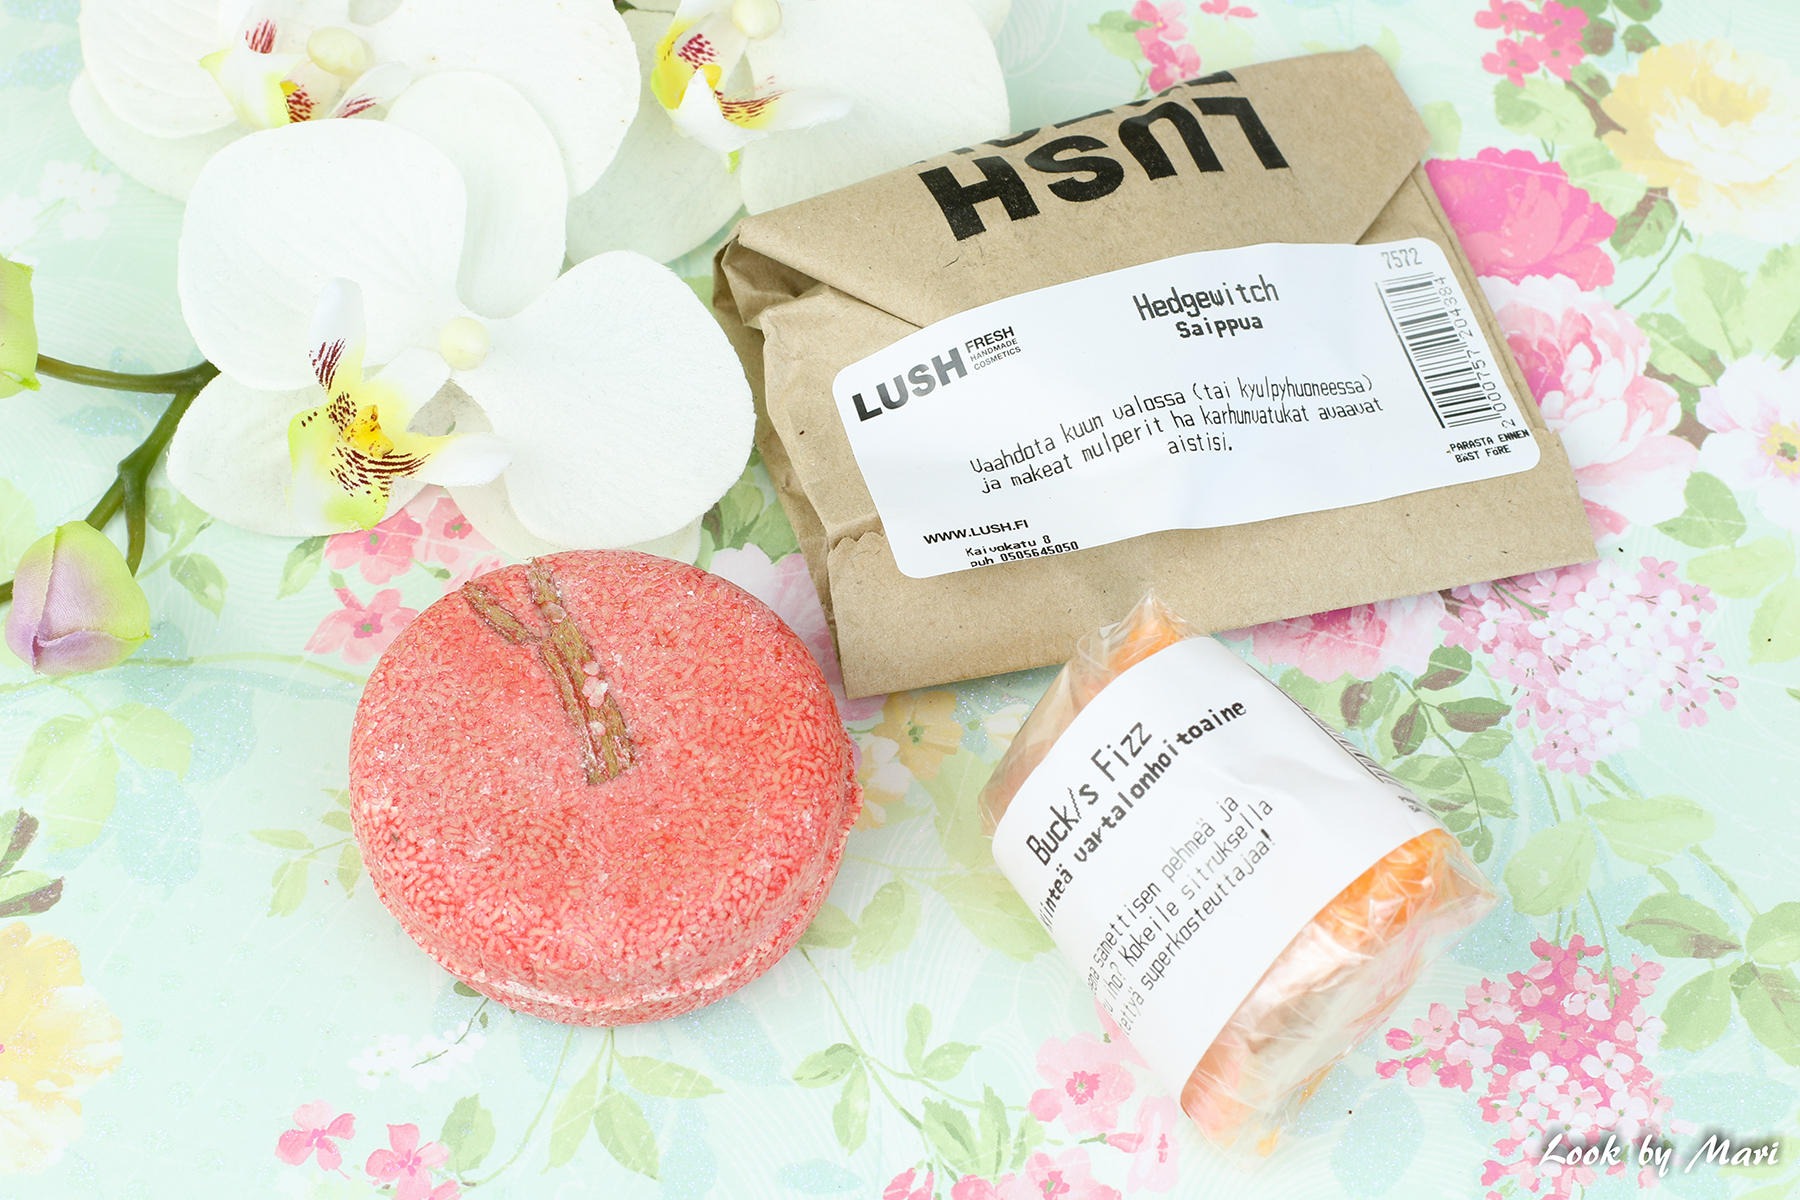 11 lush the best products what to buy vegan products parhaat tuotteet blogi